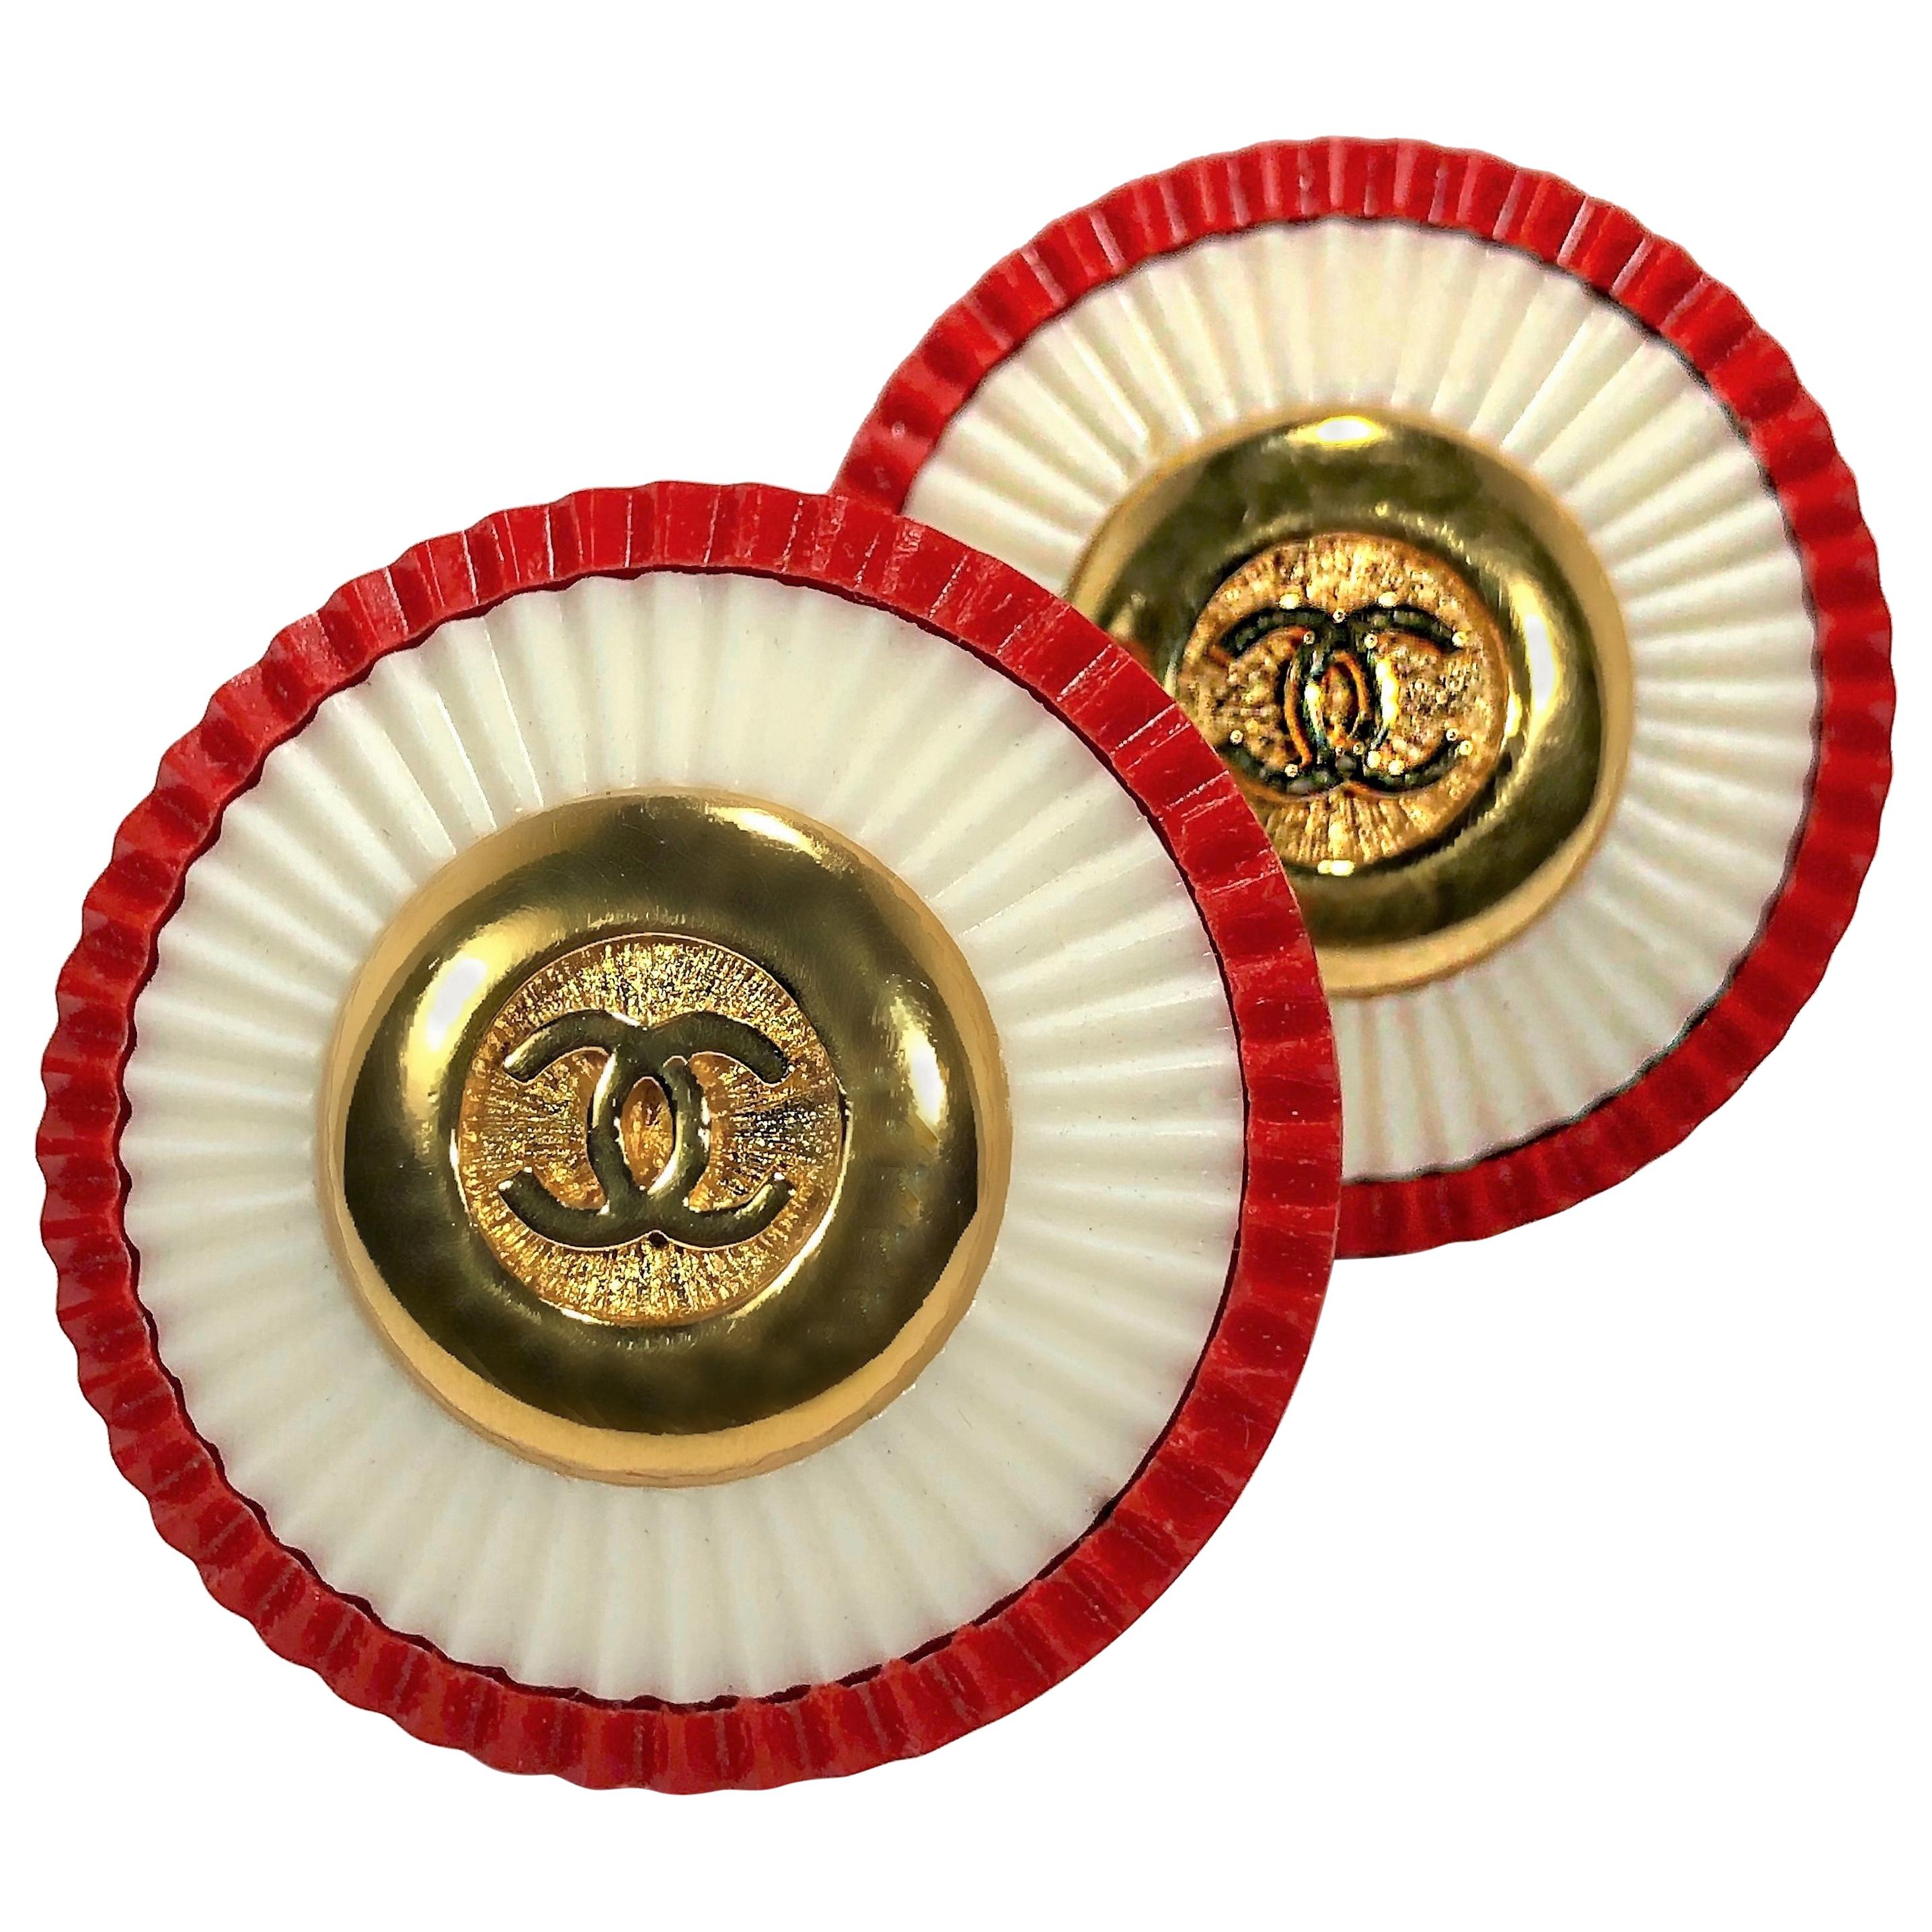 Rare Vintage Chanel 1980s Red, White, & Gold Tone CC Earrings 1.5 inch Diameter